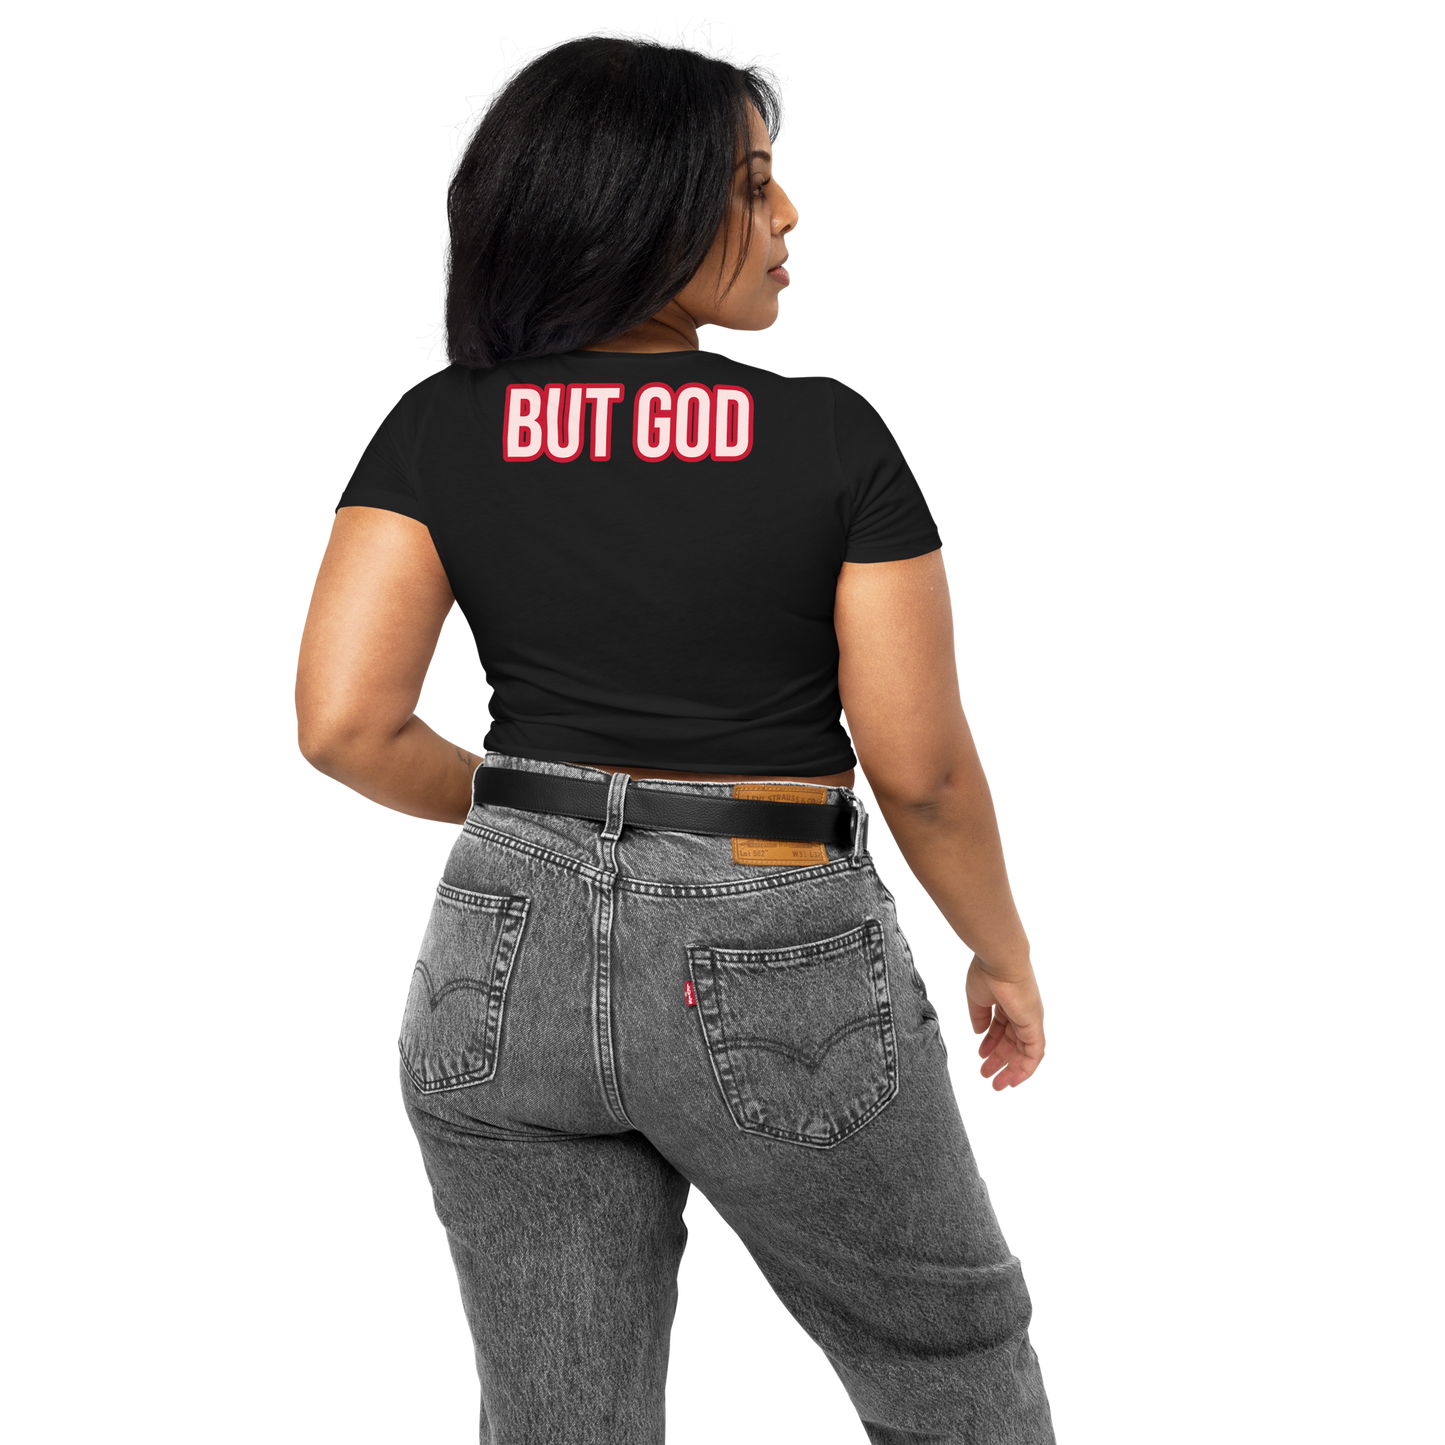 Oops Tee w back design (Enter your sin)